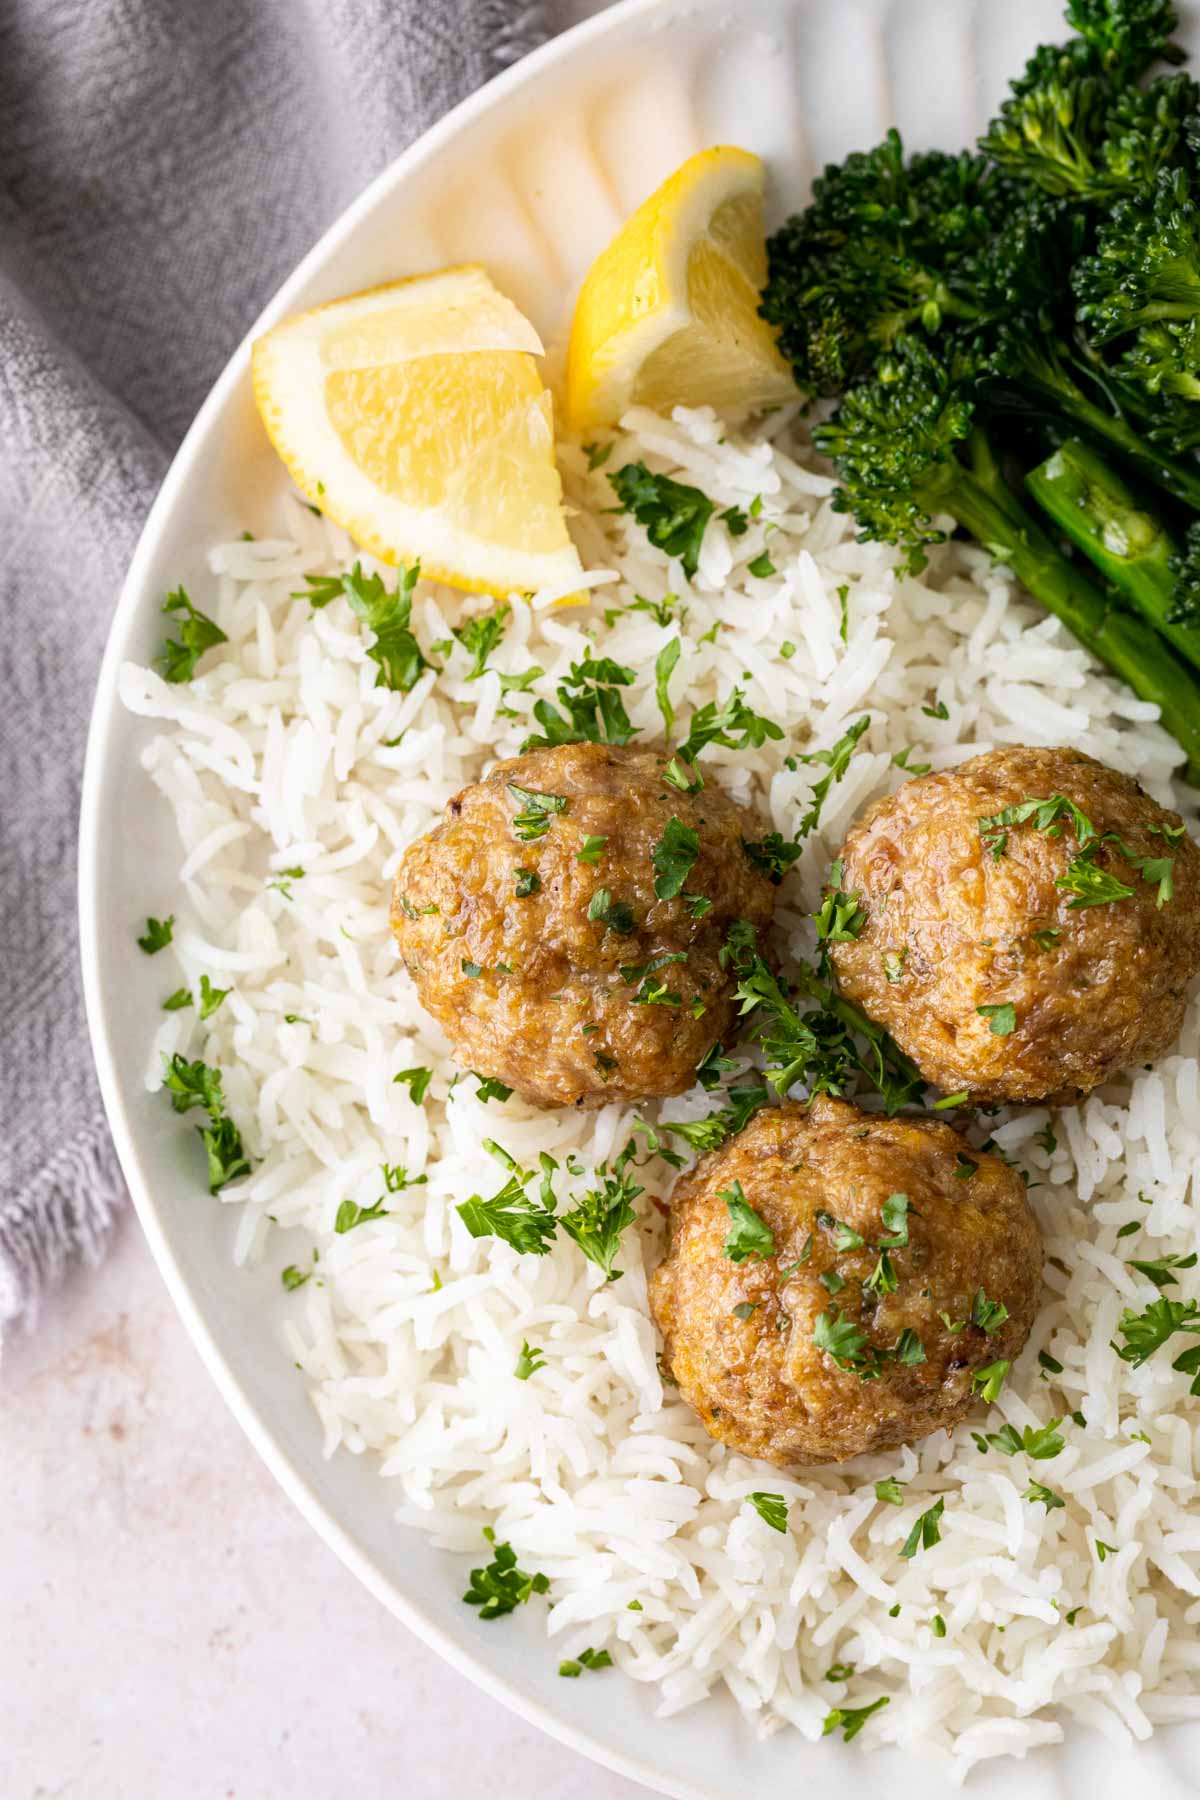 Turkey Meatballs on a plate with rice, broccolini and lemon wedges